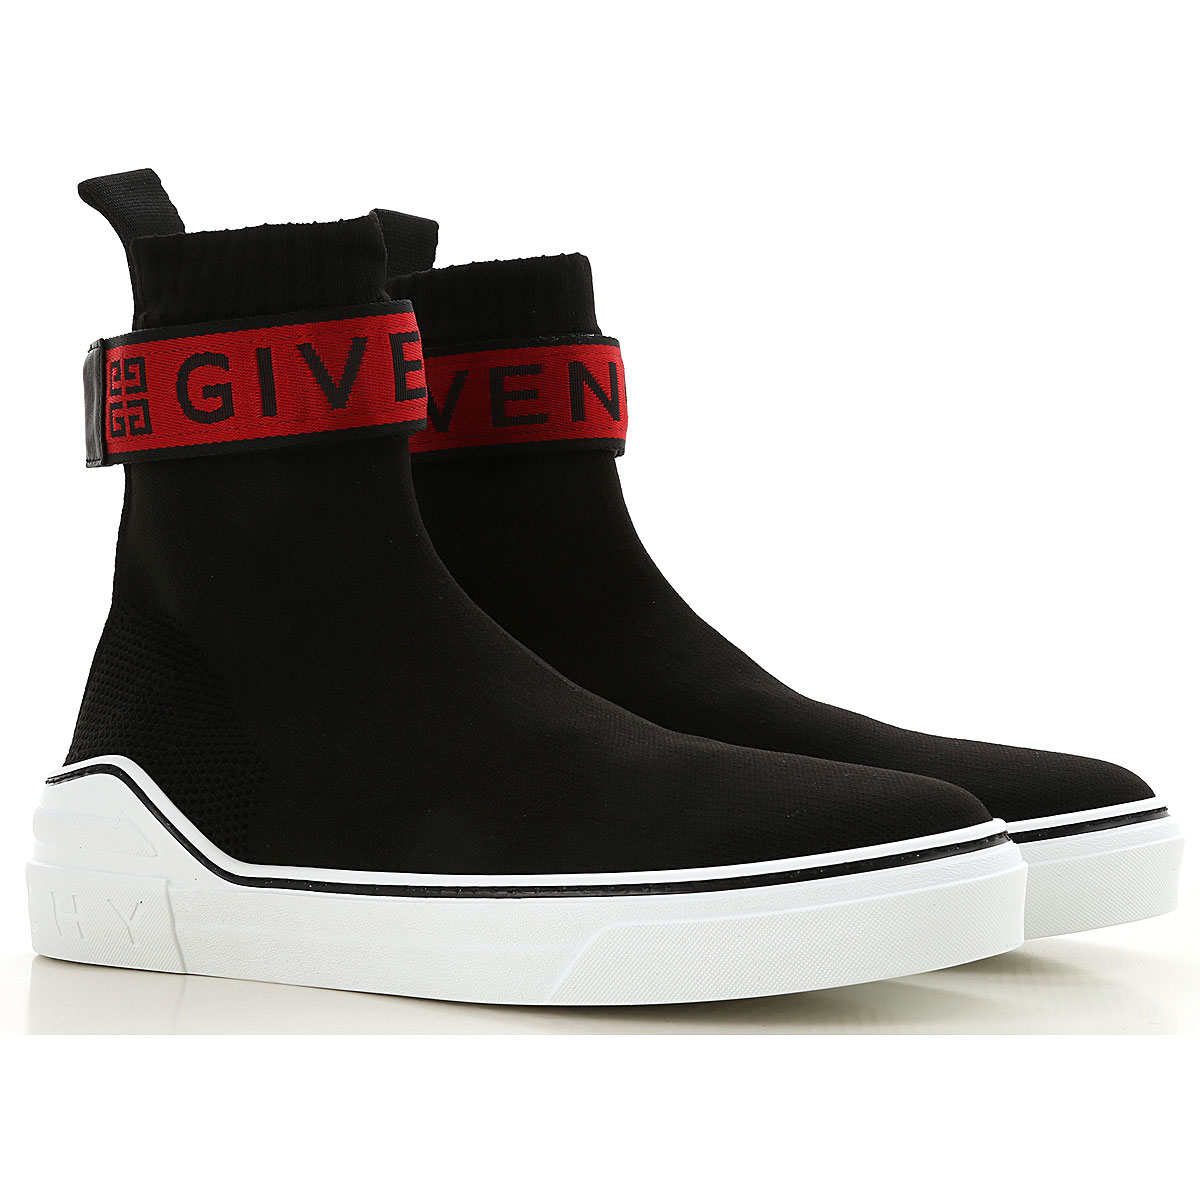 Mens Shoes Givenchy, Style code: bh000th0ag-009-